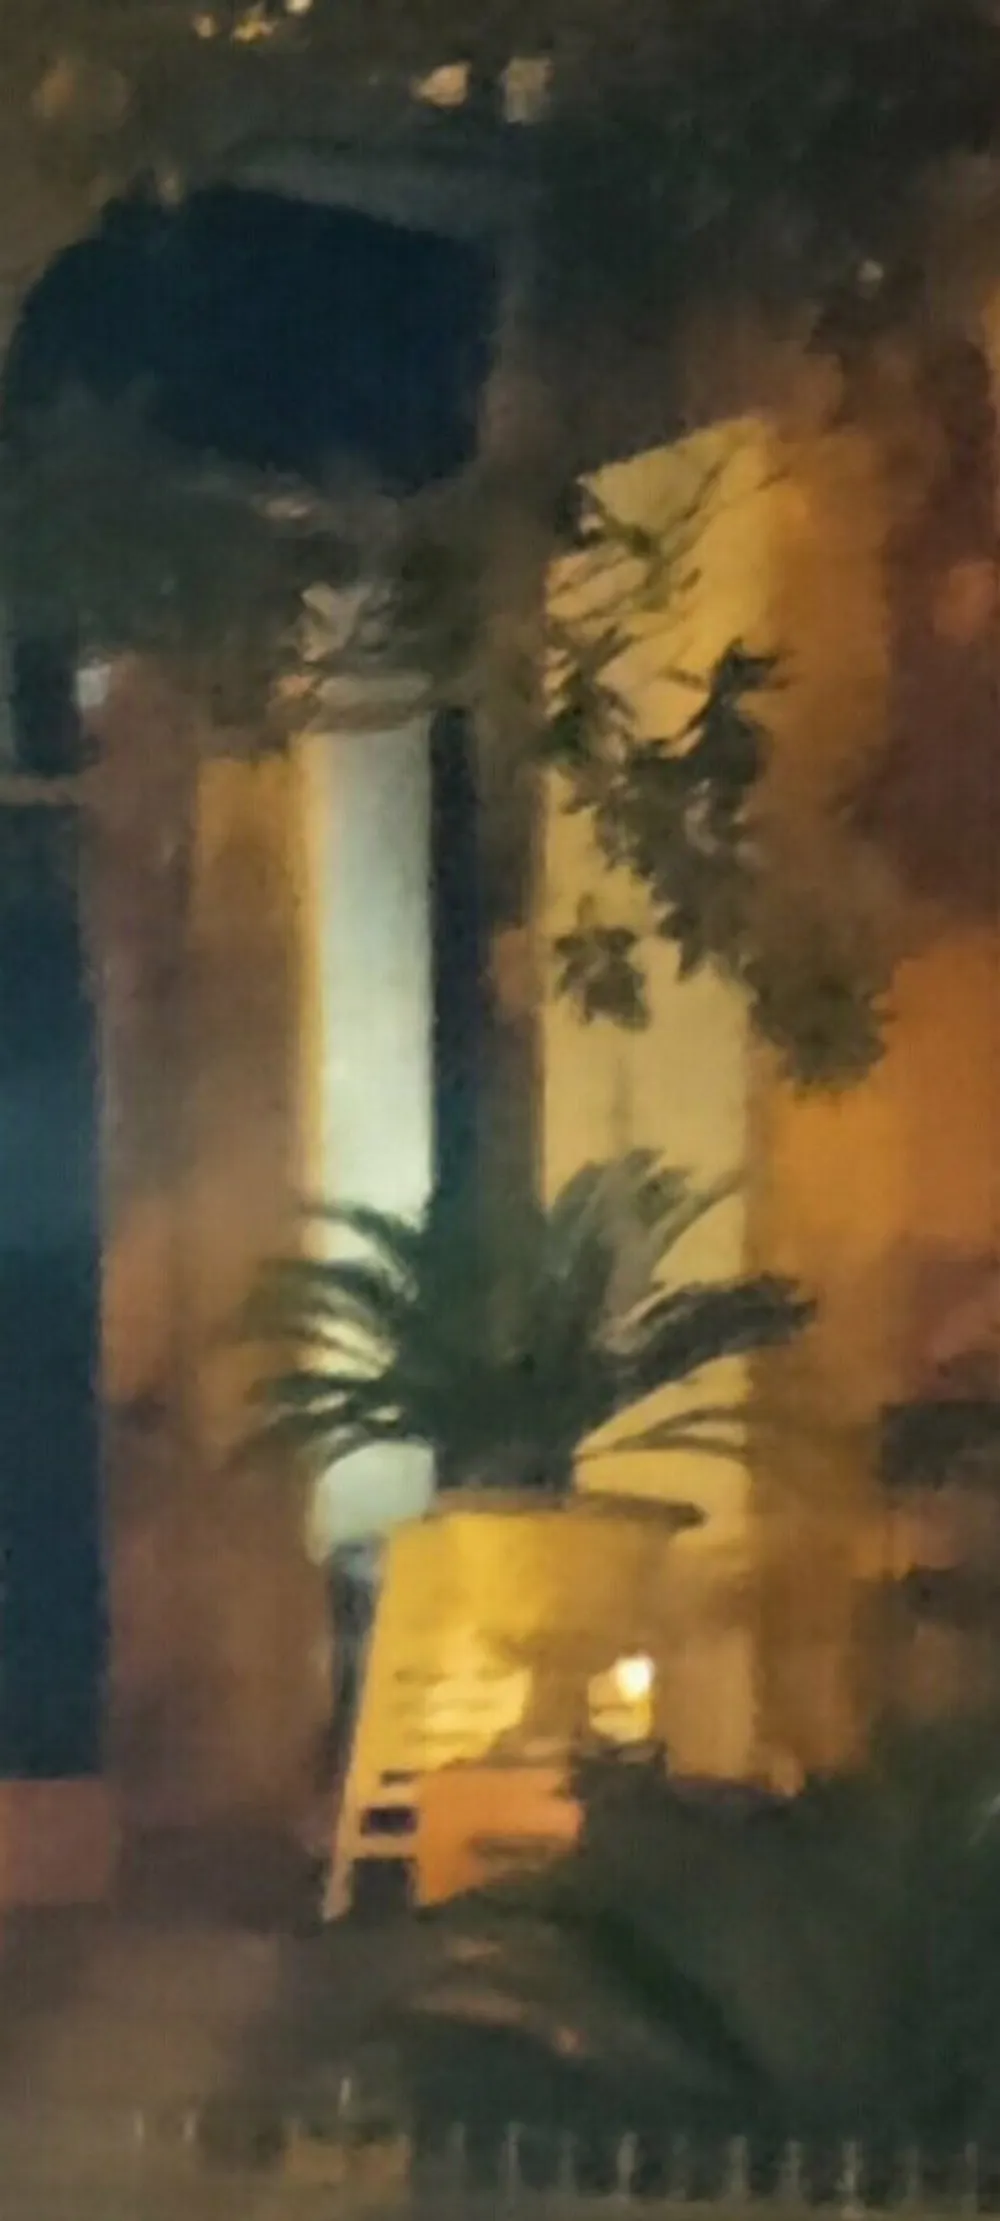 The image shows a blurry nighttime scene with palm trees and a building possibly illuminated by street lighting or adjacent lights creating a somewhat mysterious ambiance